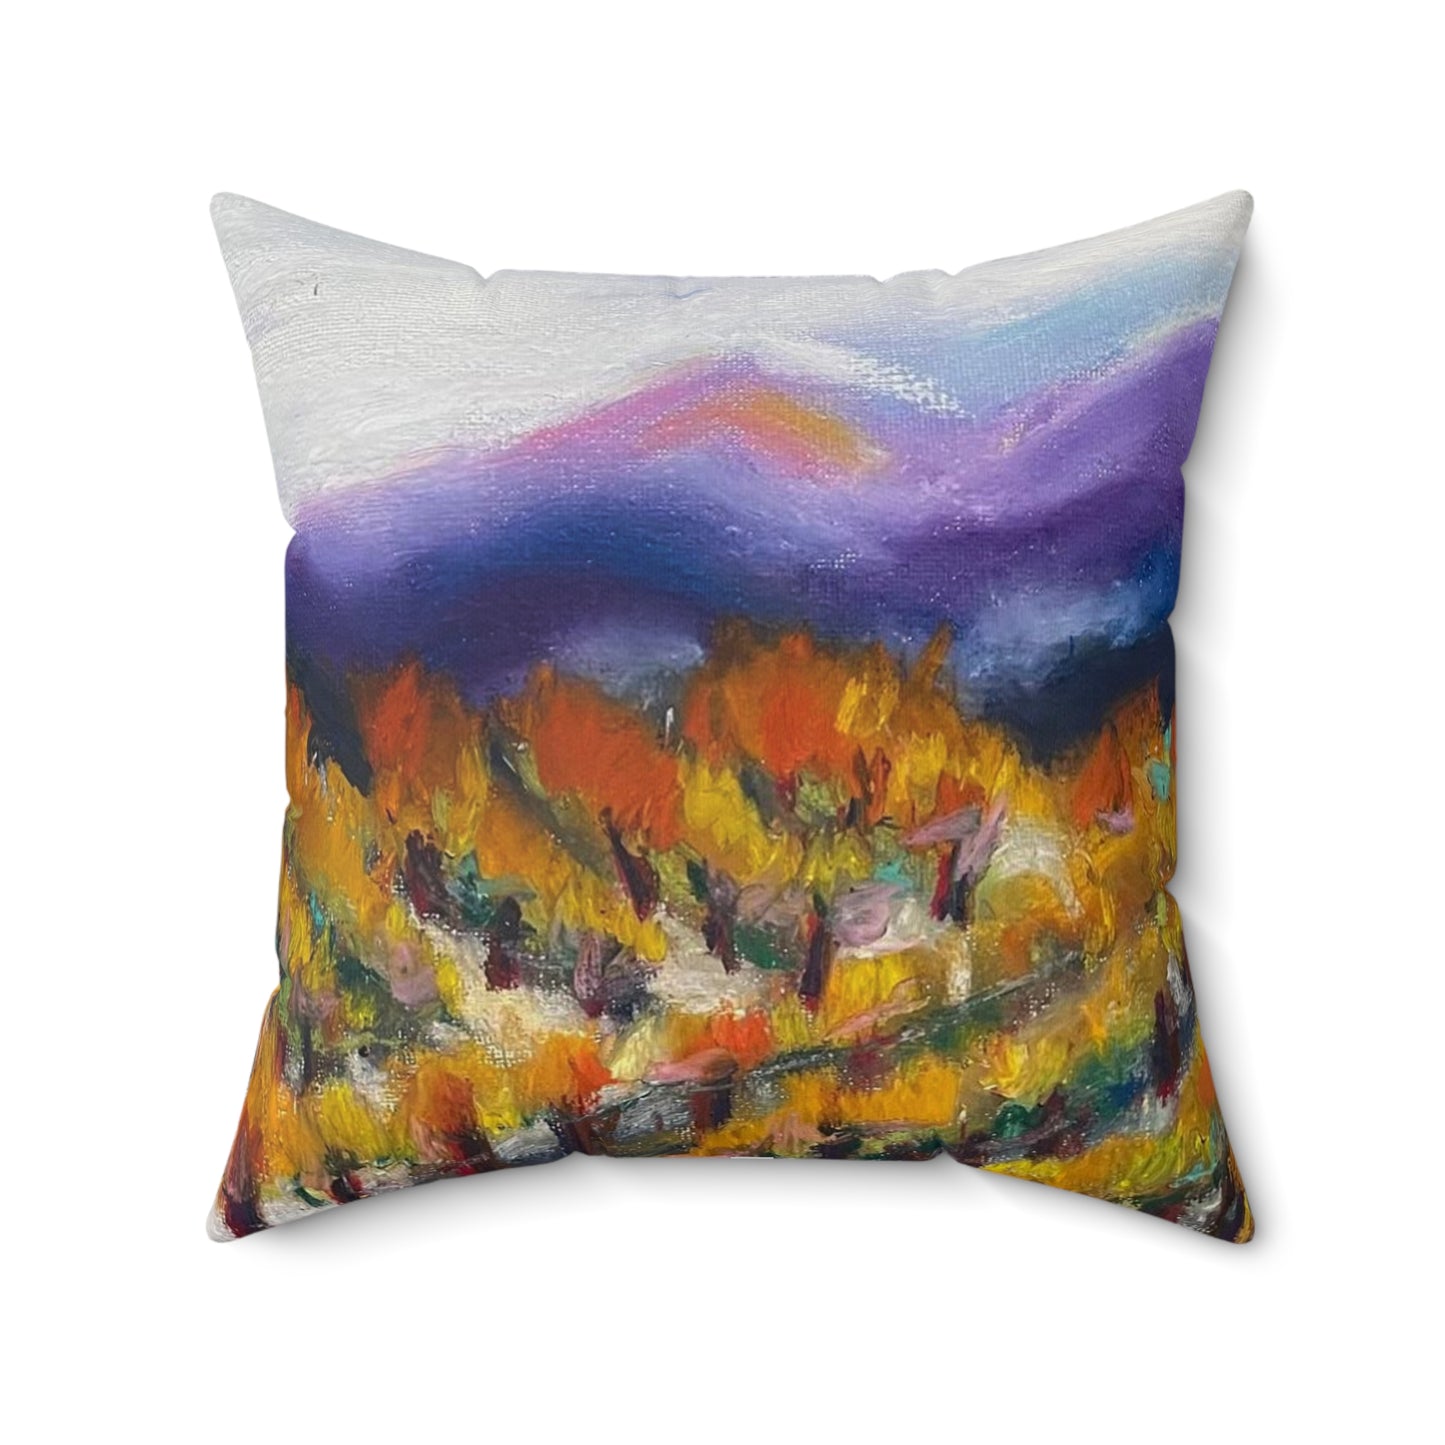 Misty Vines Indoor Spun Polyester Square Pillow